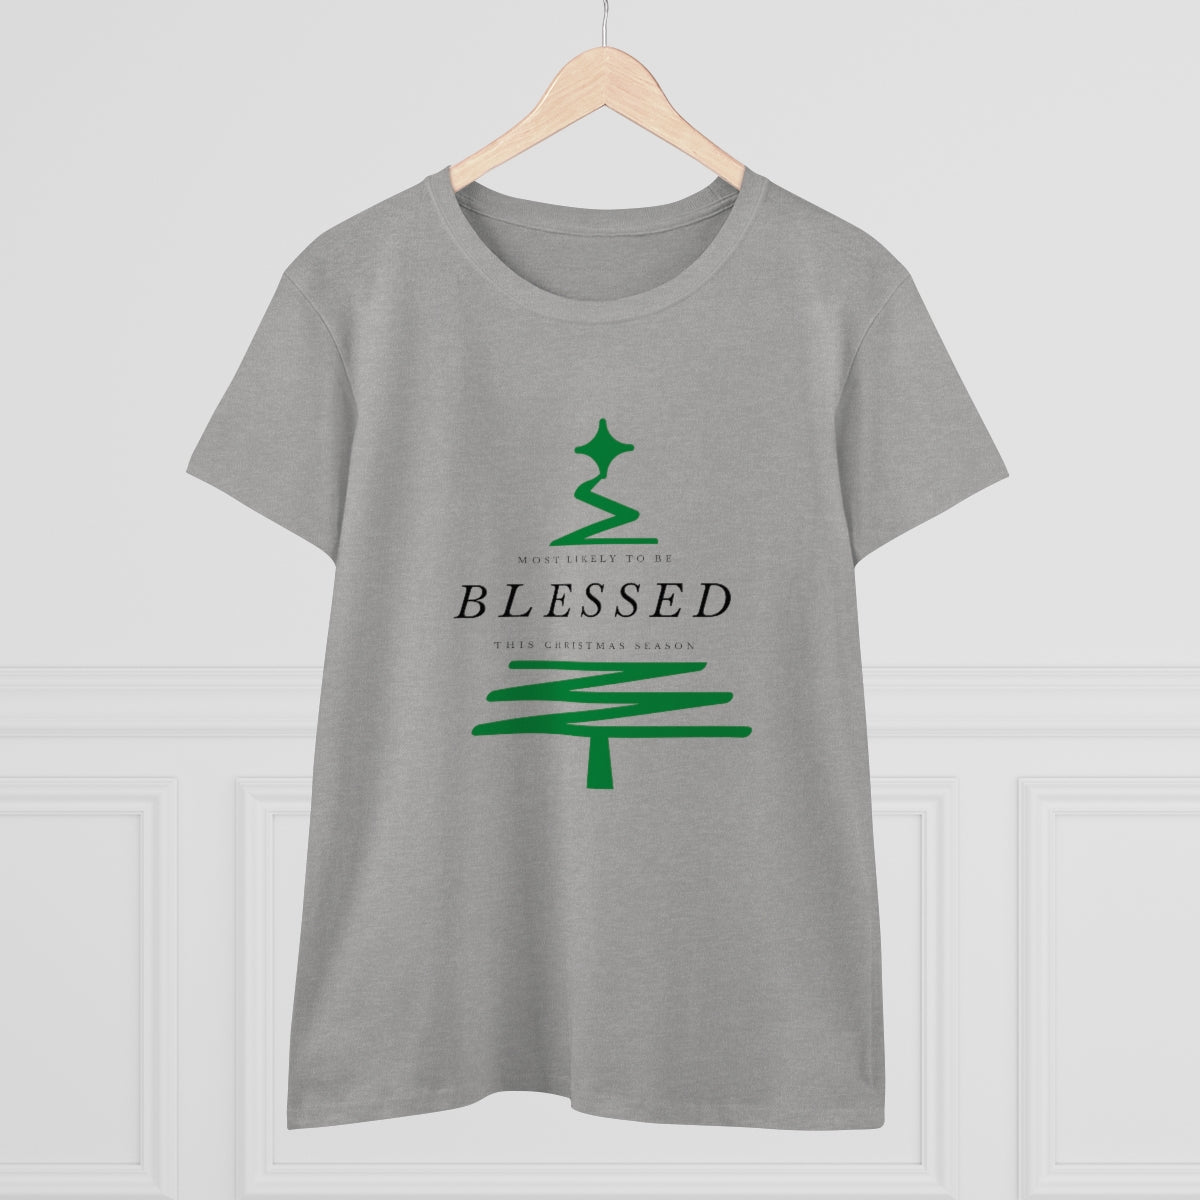 Most Likely to Be Blessed - Christmas Tee